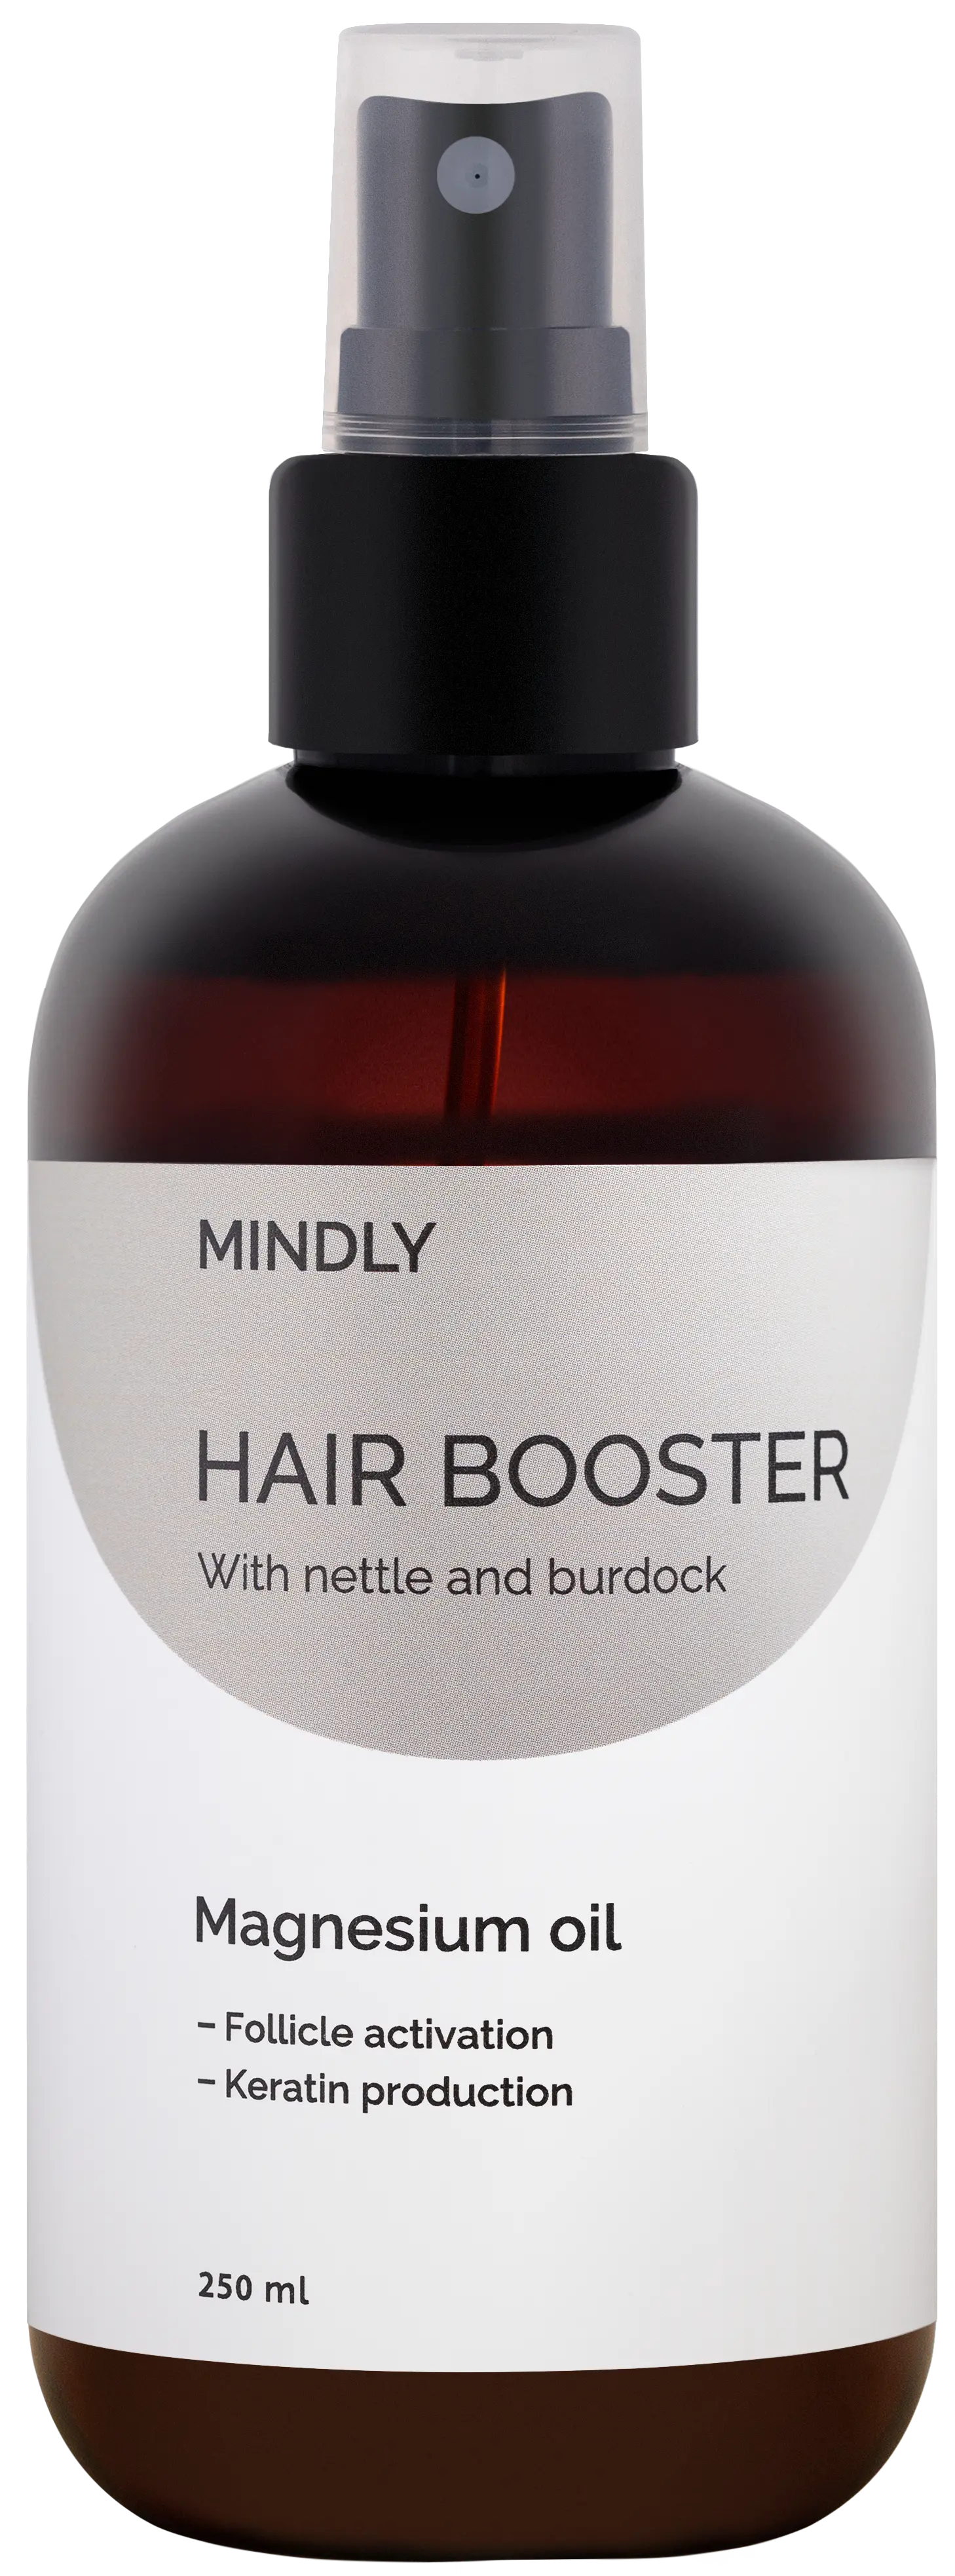 MINDLY Hair booster